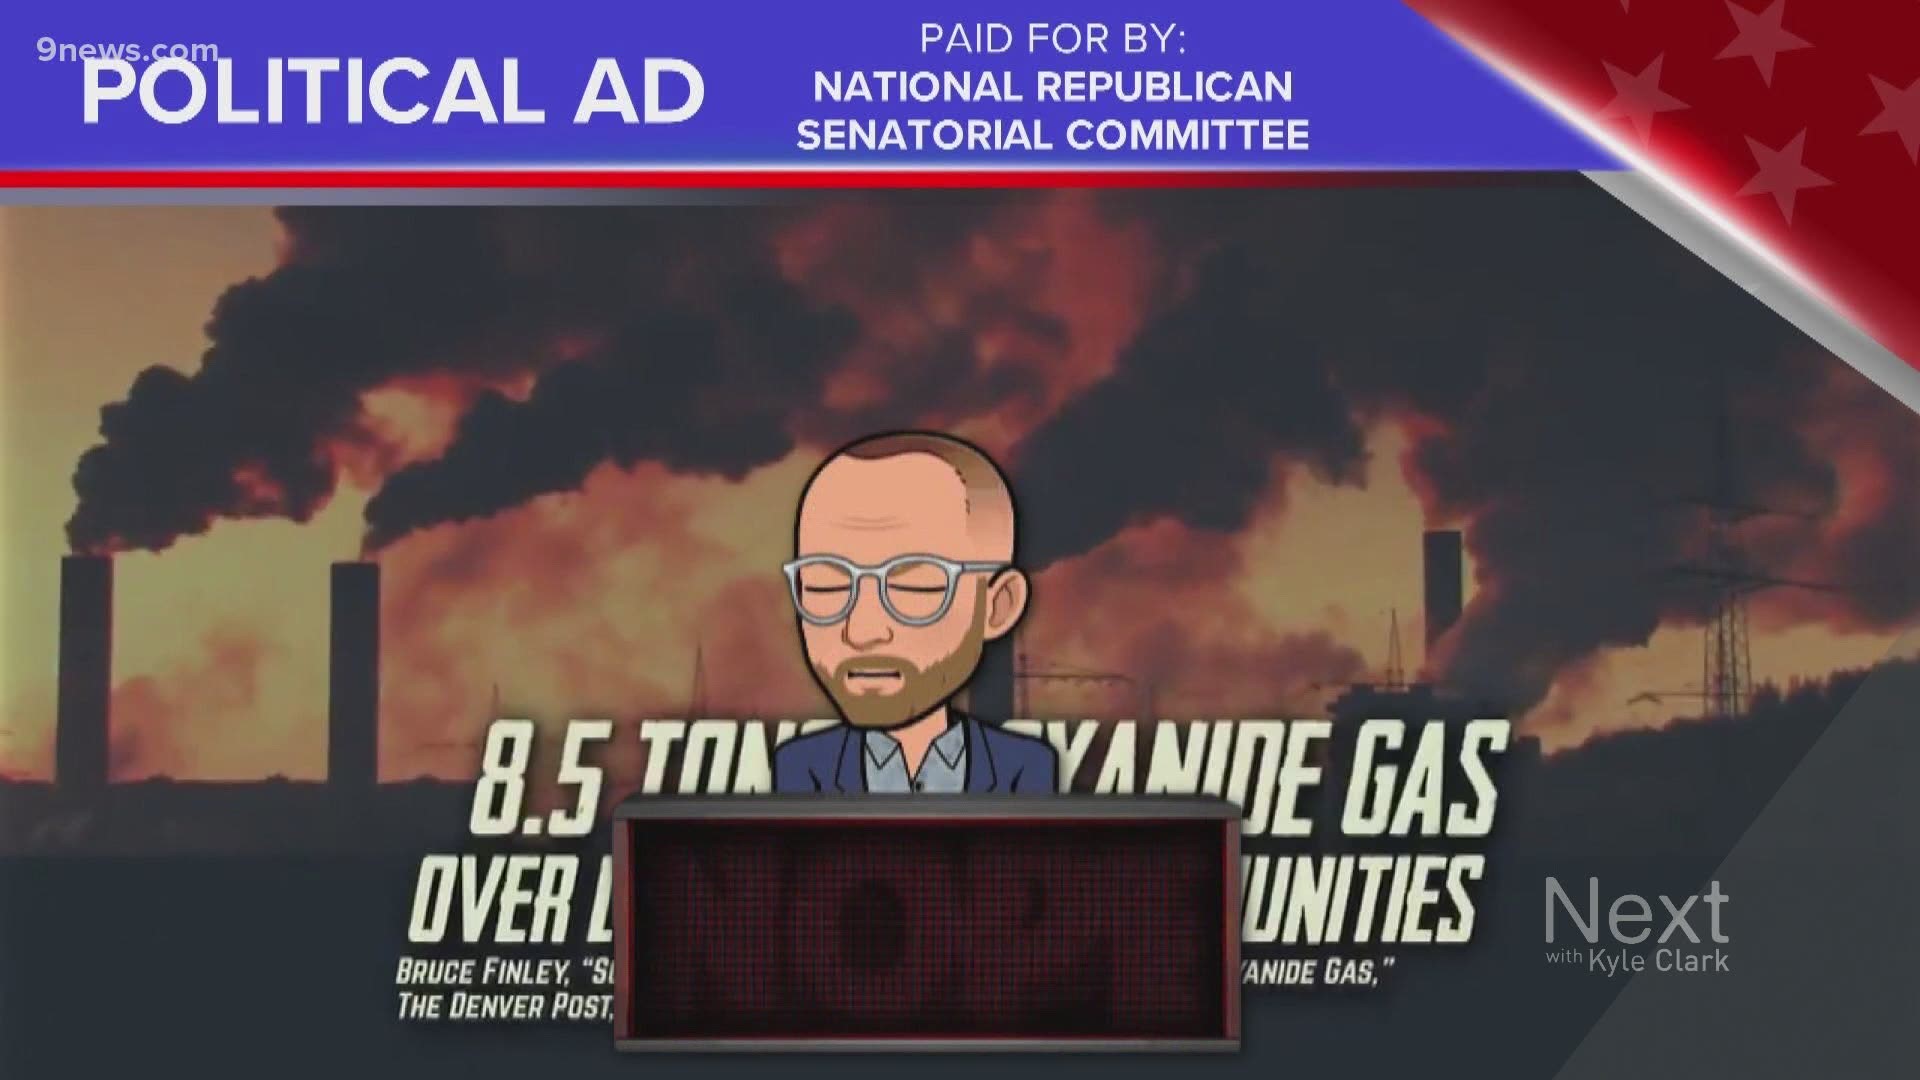 The National Republican Senatorial Committee continues to attack John Hickenlooper on an environmental issue that is not what the political ad makes it appear to be.